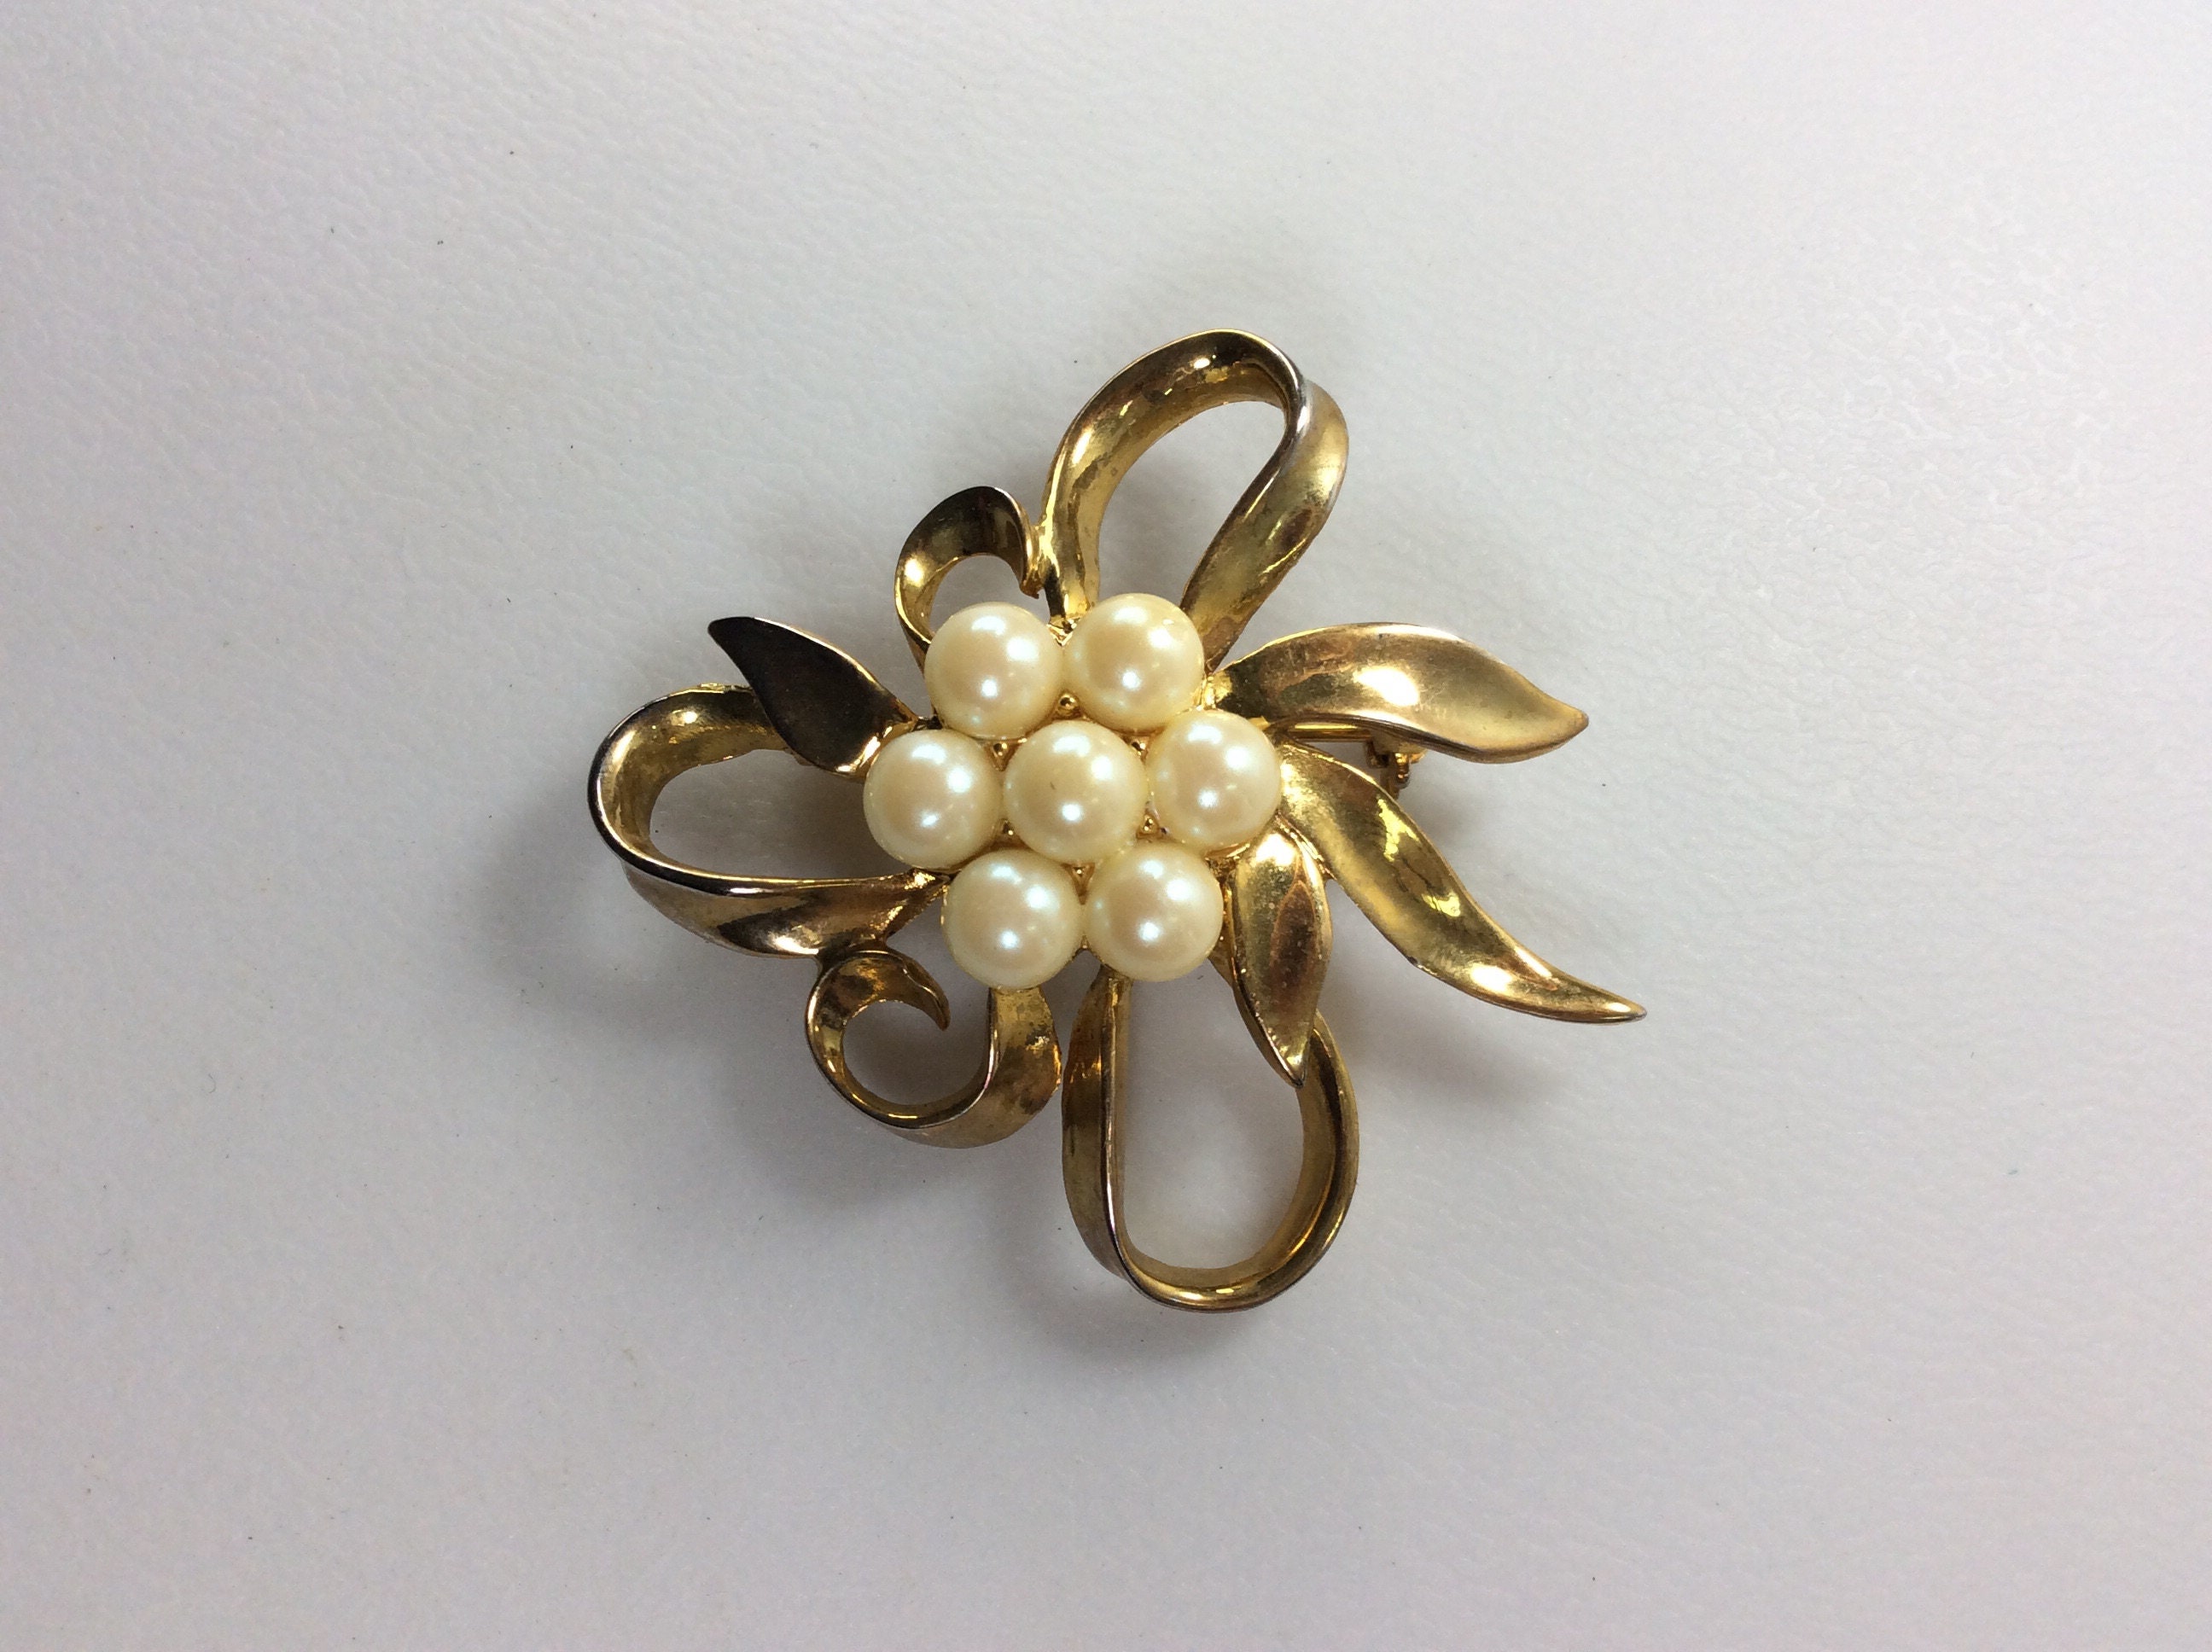 15offSaleEndsTomorrow Vintage Pin Brooch Gold Toned Round Abstract Design With Faux Pearls Used